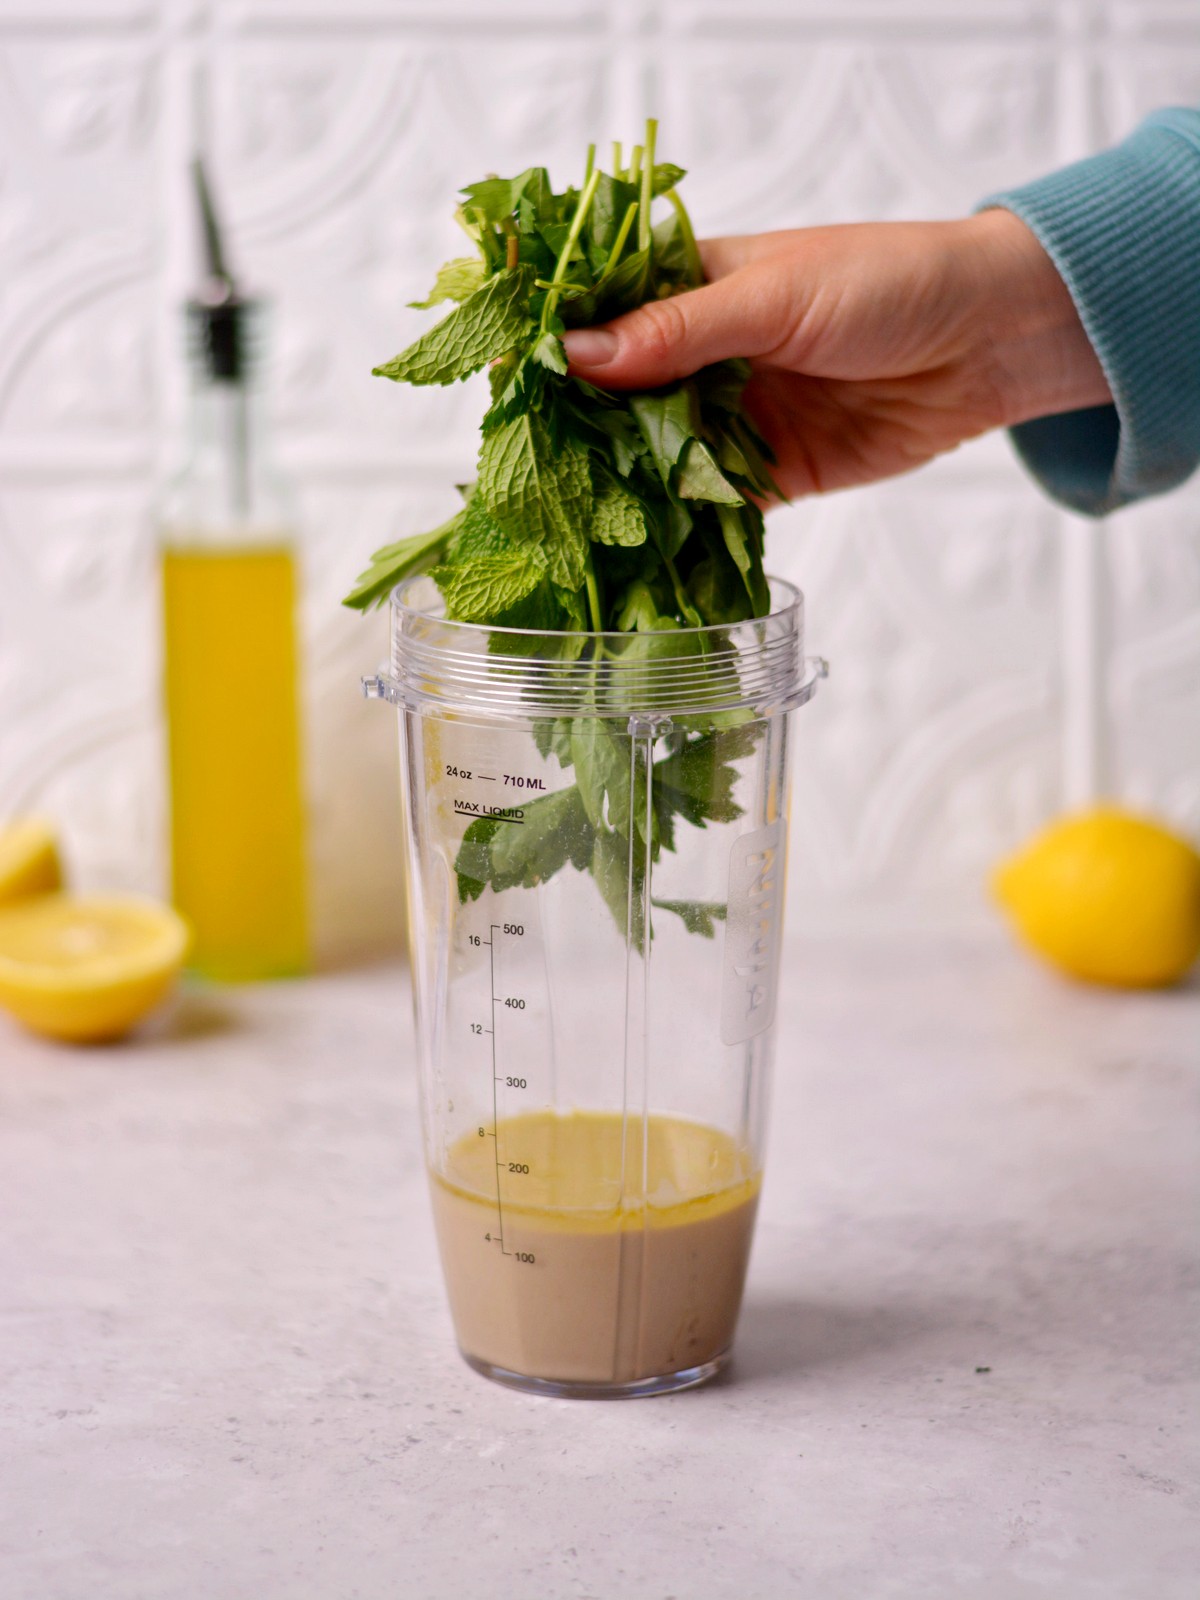 A hand adding herbs to a blender cup.